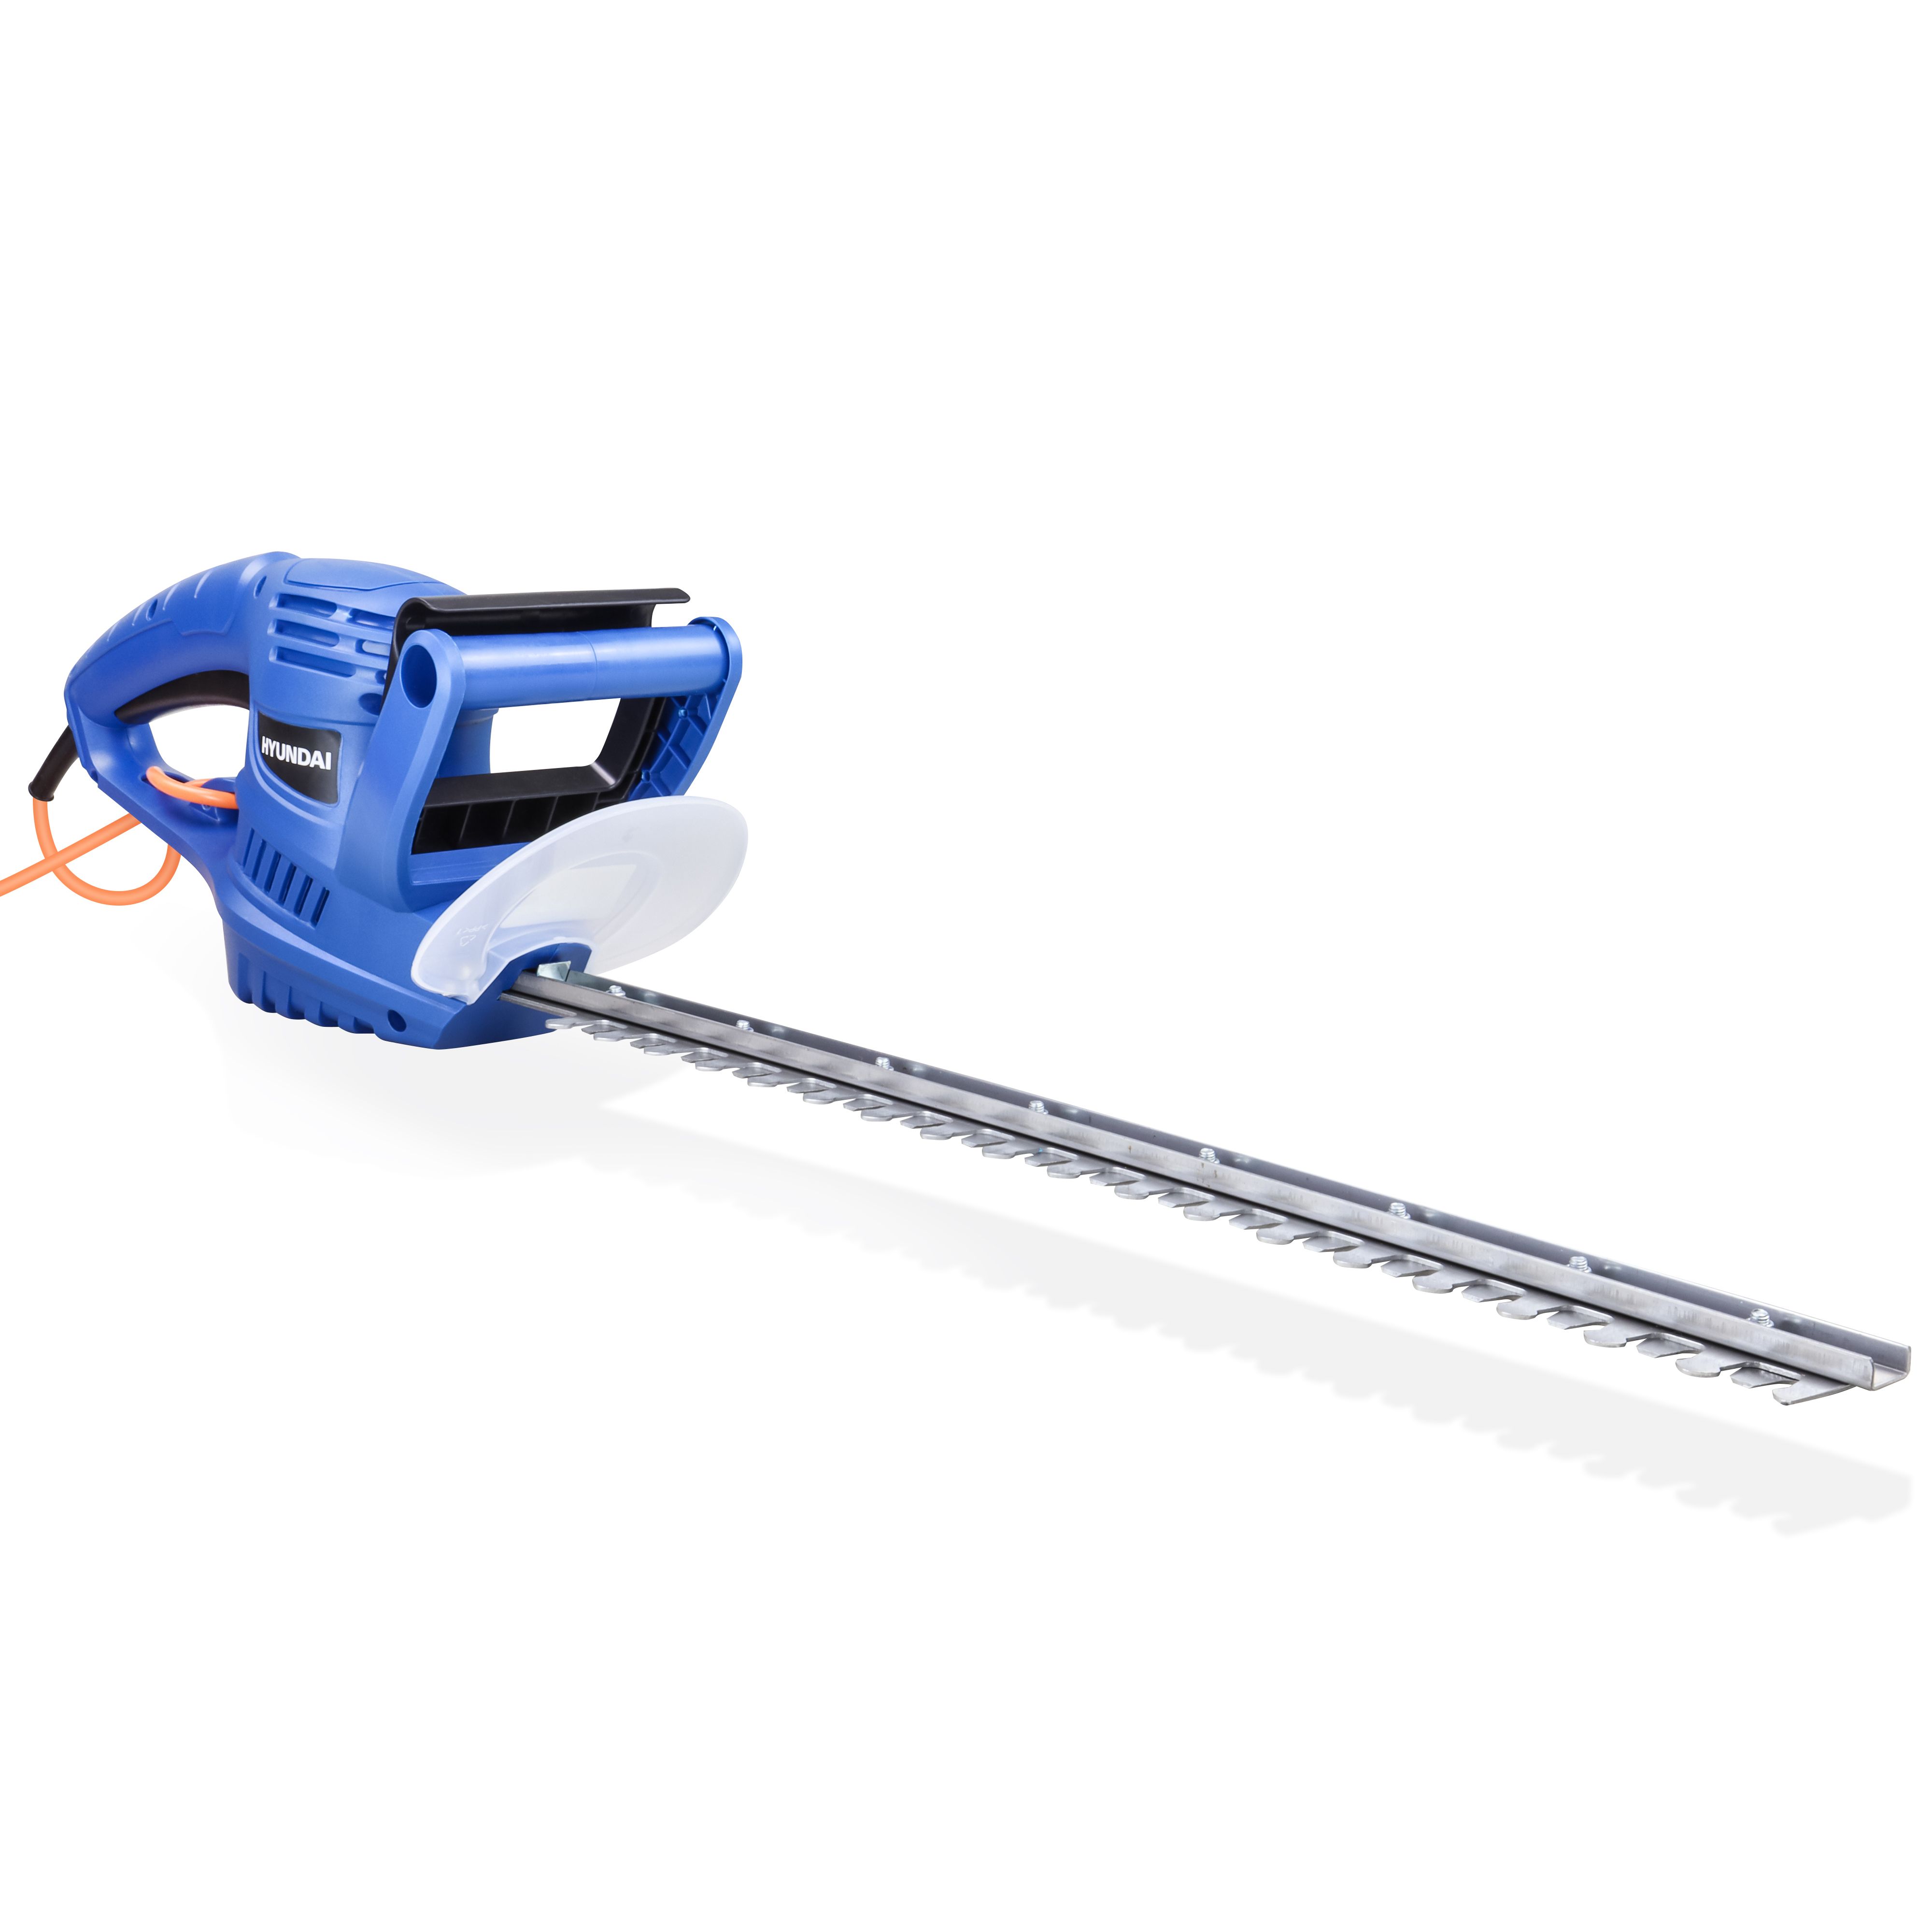 Hyundai Corded 550W Hedge trimmer - 510mm